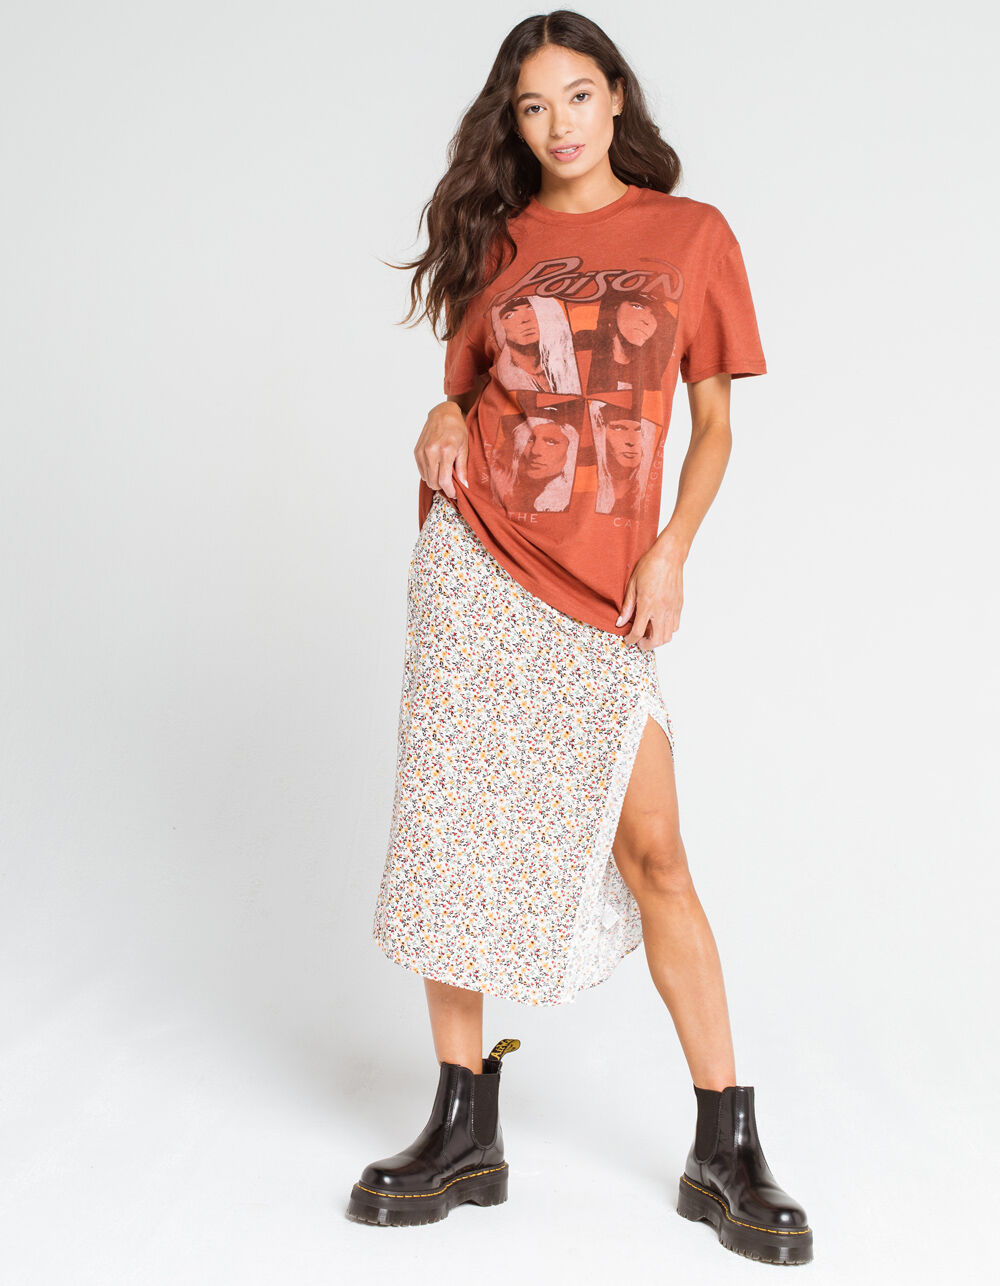 WEST OF MELROSE Poison Womens Oversized Tee image number 3